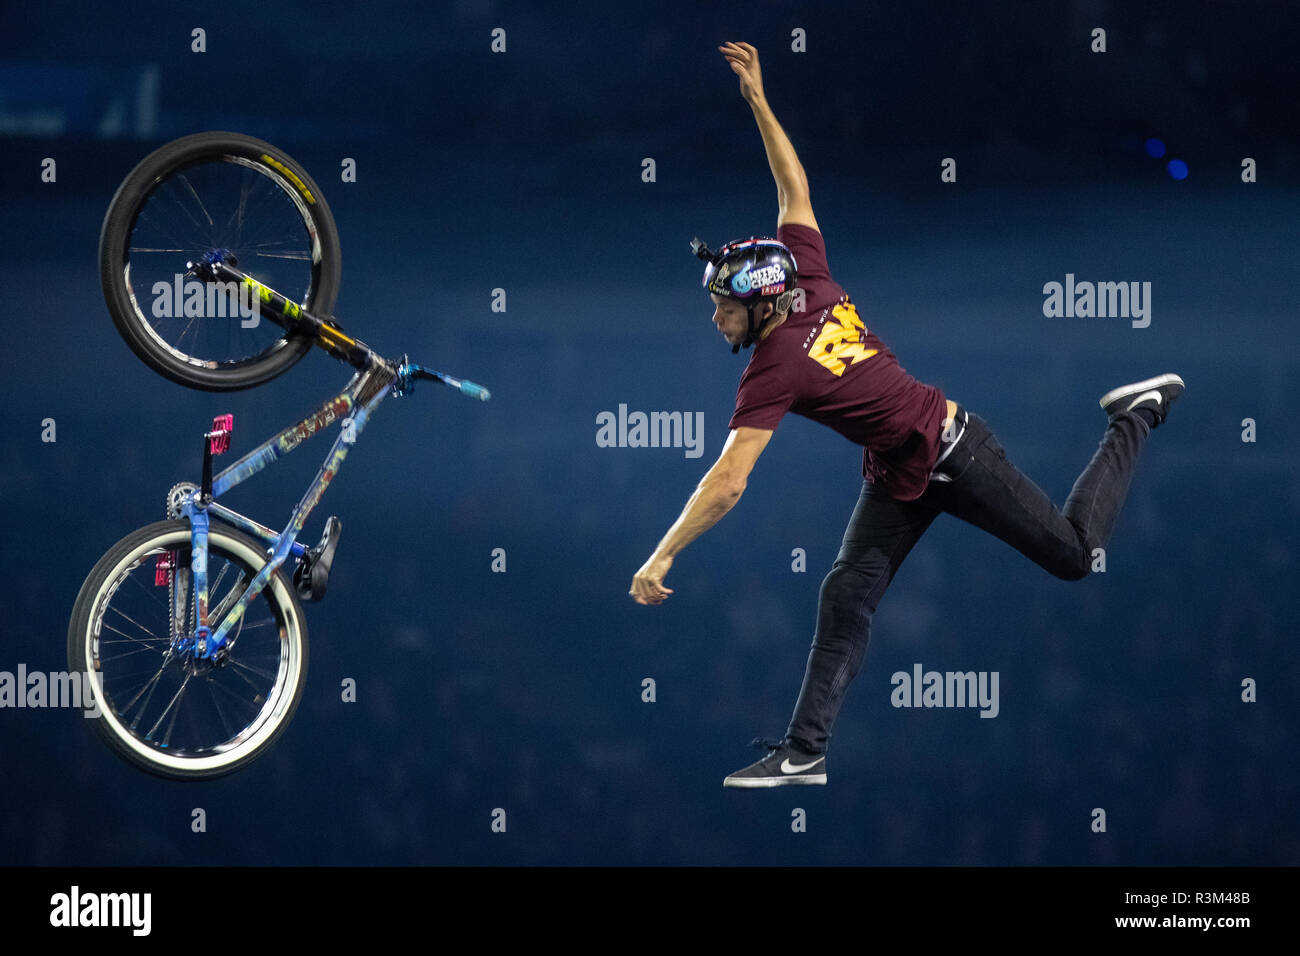 London, UK. 23rd Nov, 2018.Nitro Circus Live 2018, breathtaking choreographed  routines for FMX, BMX and Skate. Riders will execute moves such as the Nitro Bomb and use the 40-foot Giganta ramp during the show at the O2 Arena, Uk, Credit: Jason Richardson/Alamy Live News Stock Photo